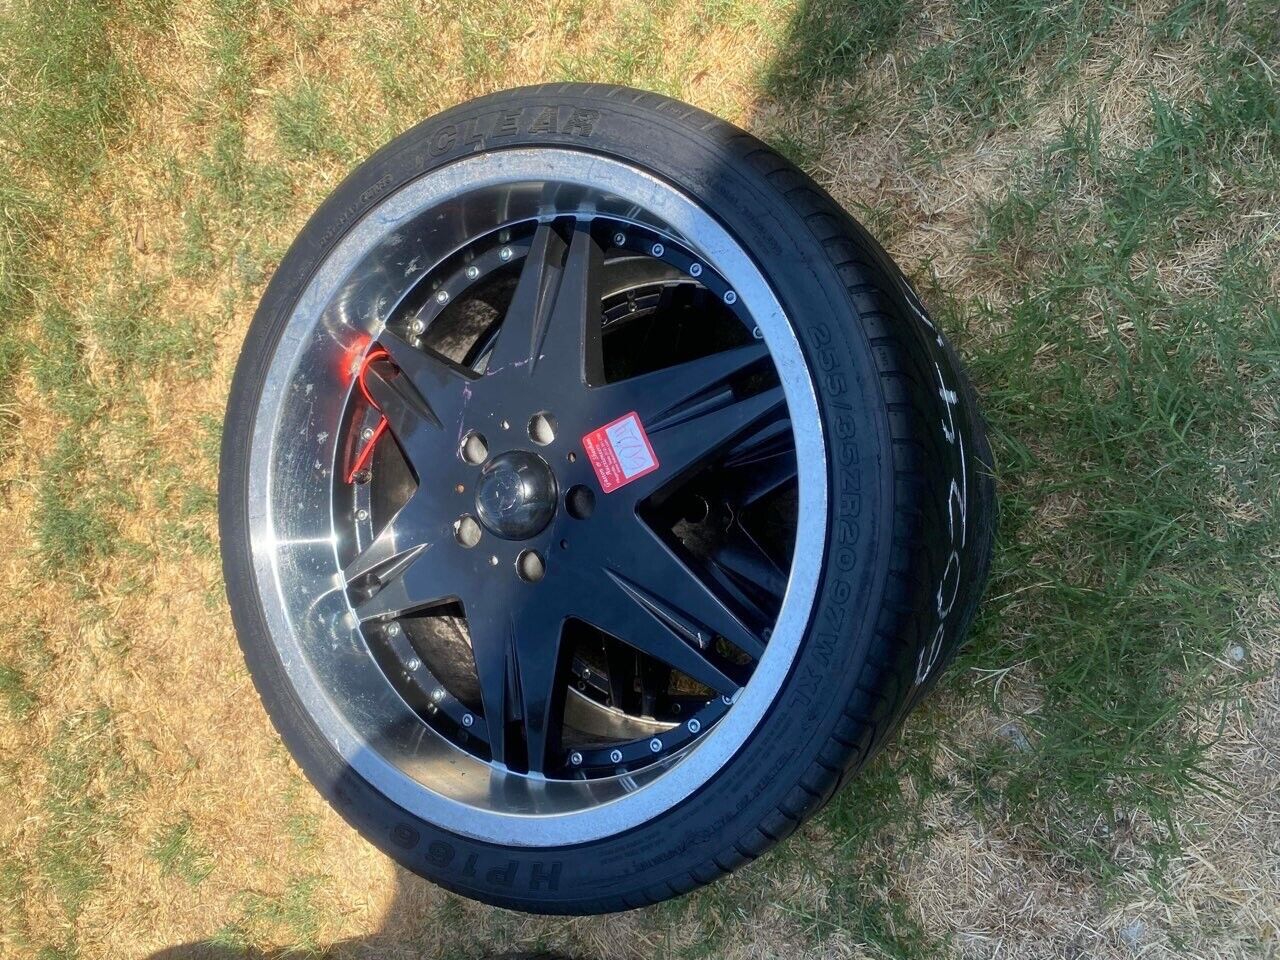 CLEAR 255/35ZR2097WXL TIRES WITH BLACK RIMS,